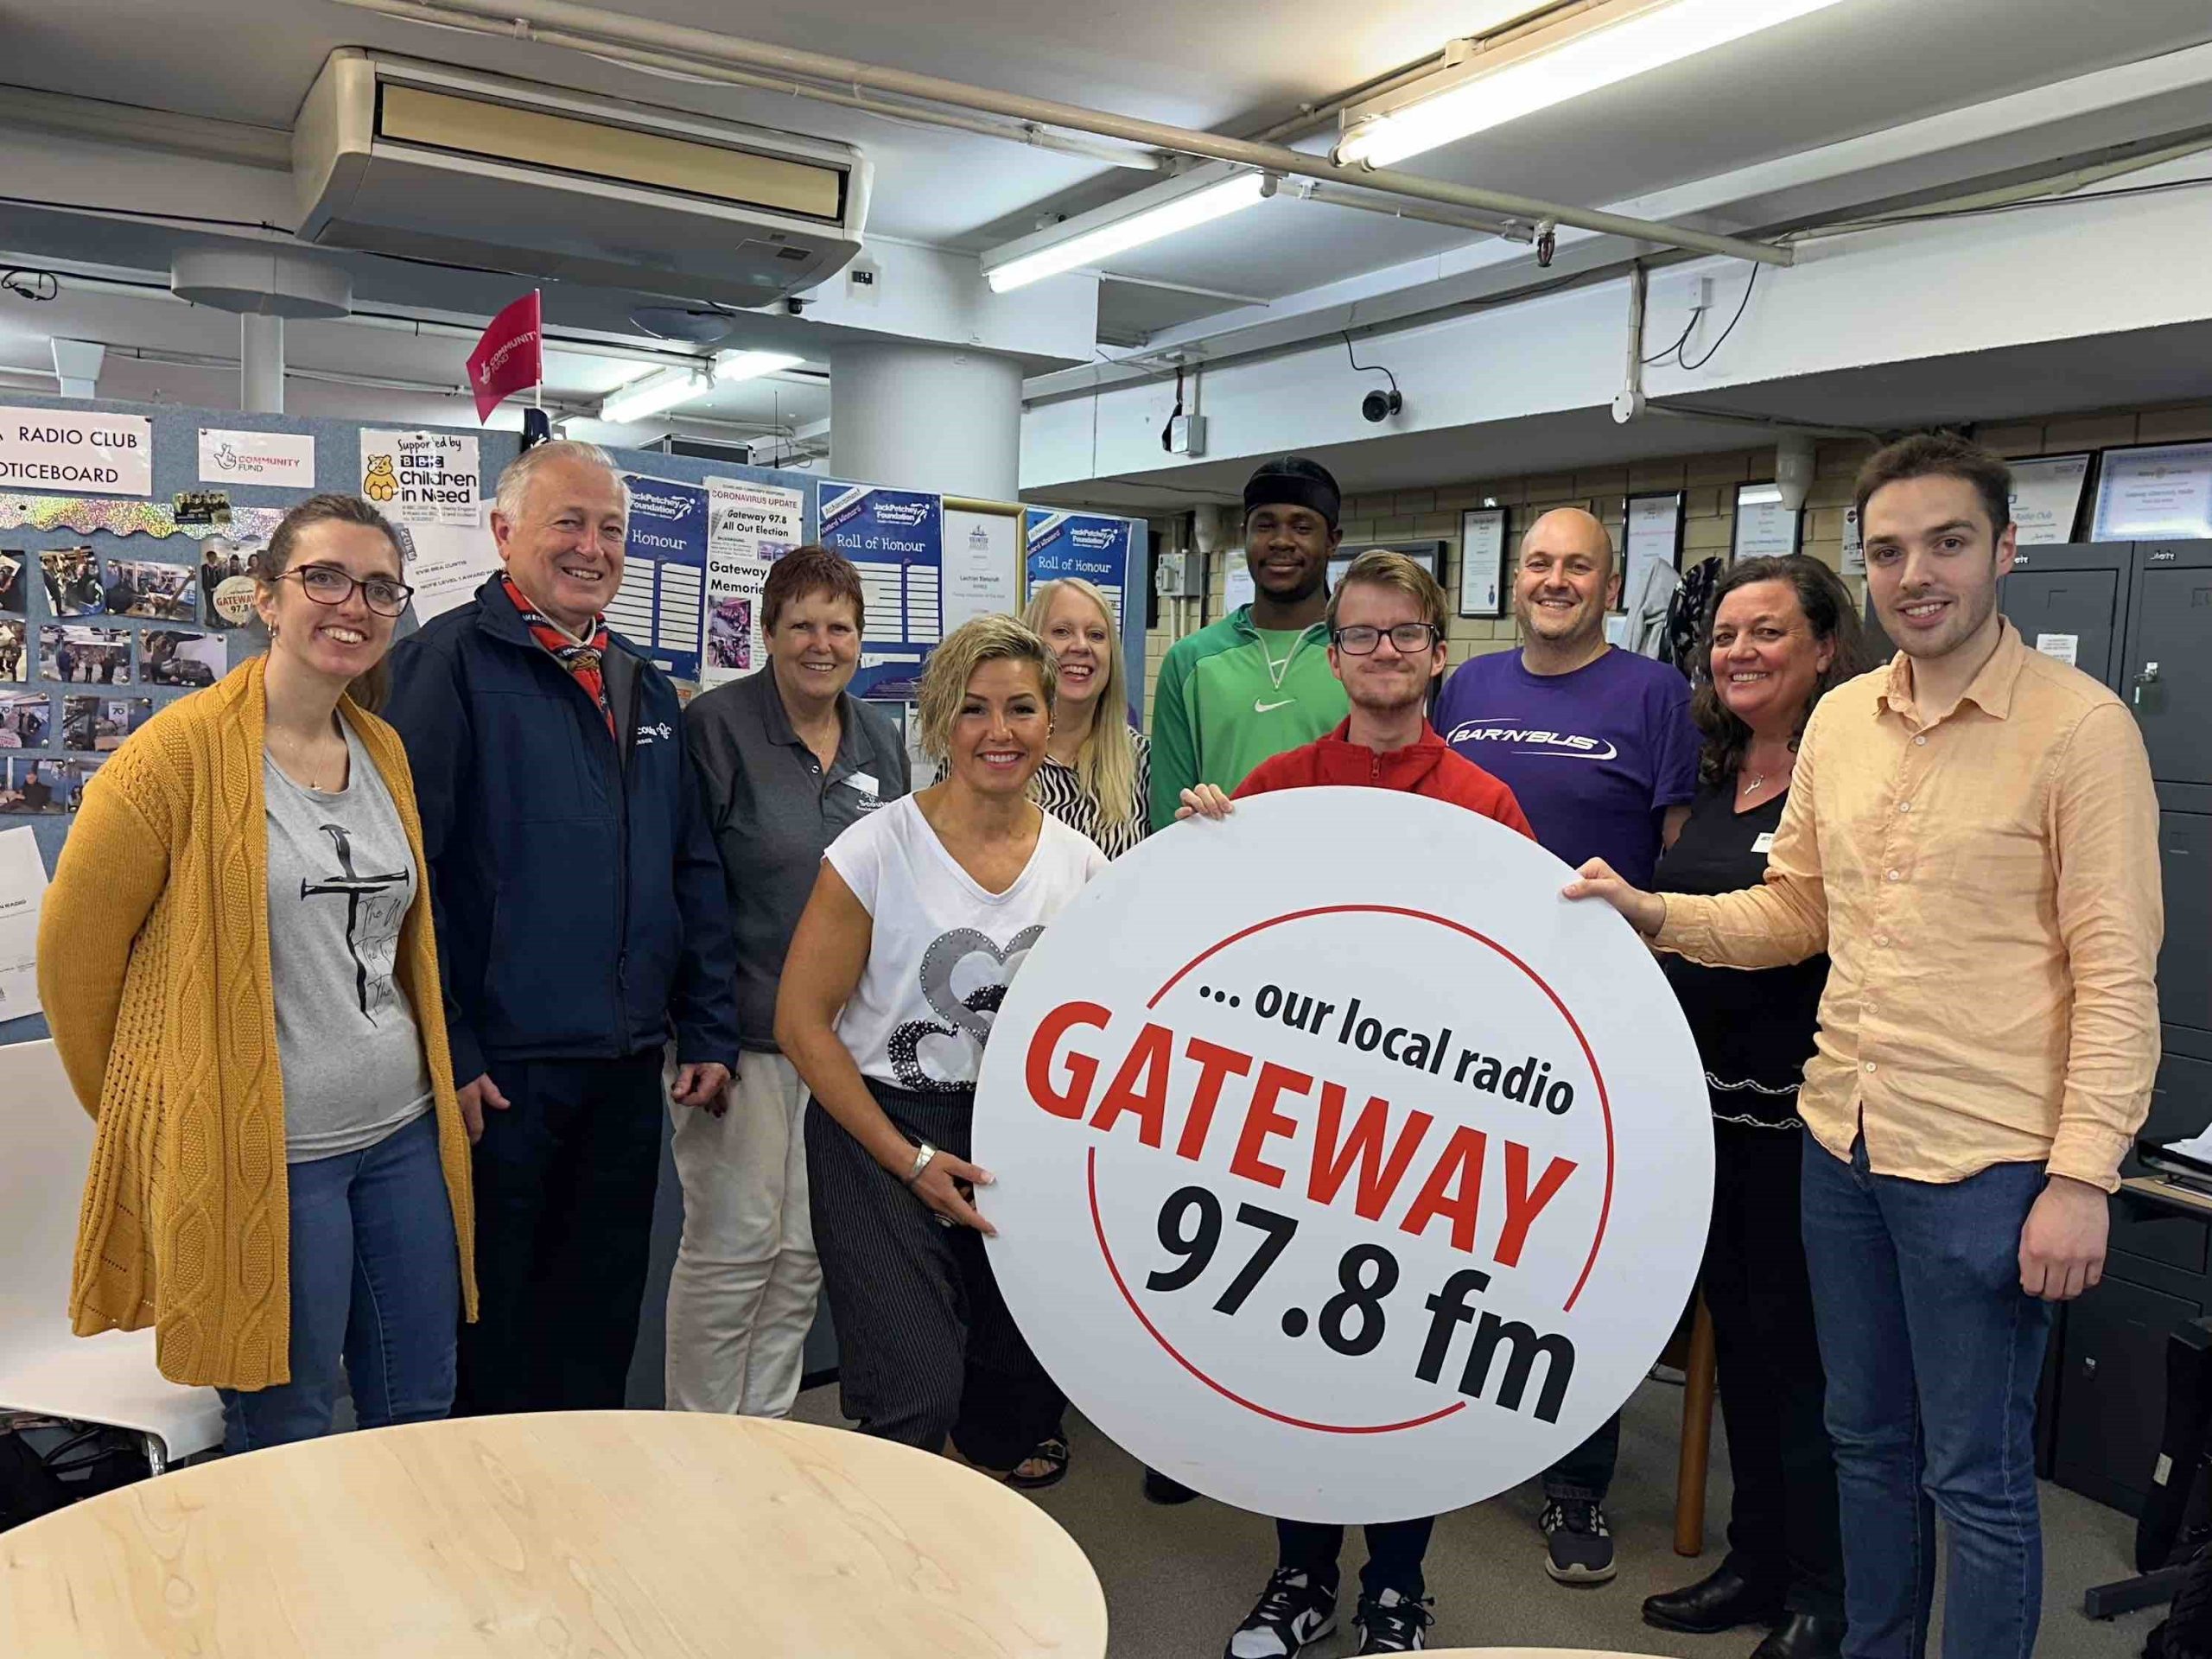 Featured image for “We Love Youth Work day at Gateway 97.8”